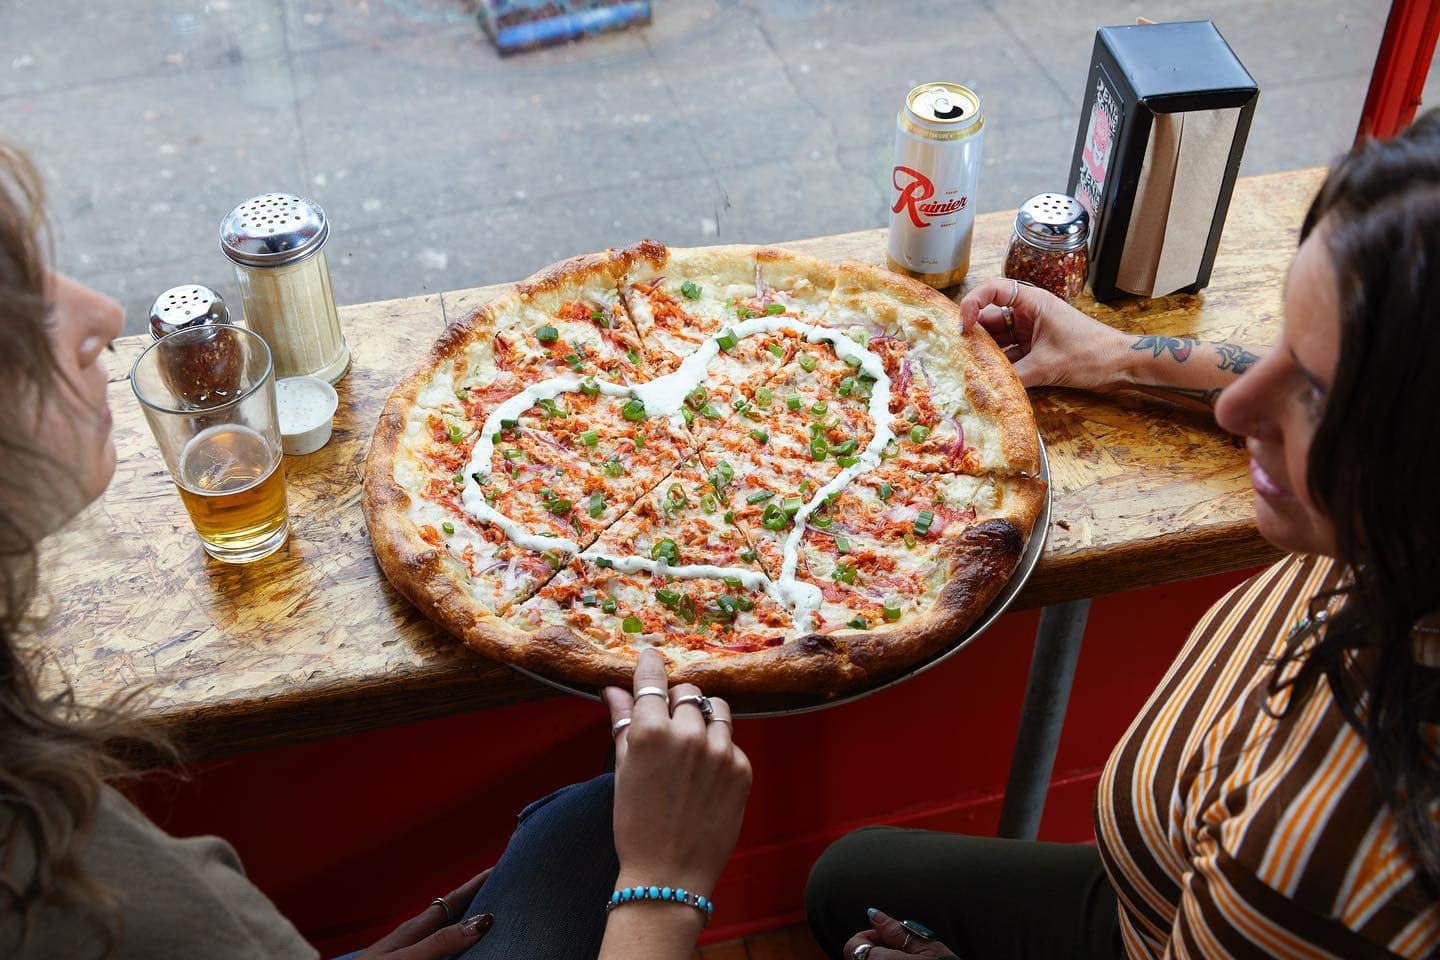 Two people sitting around a large pizza, with a drizzle of sauce in the shape of a heart, while they are drinking beers